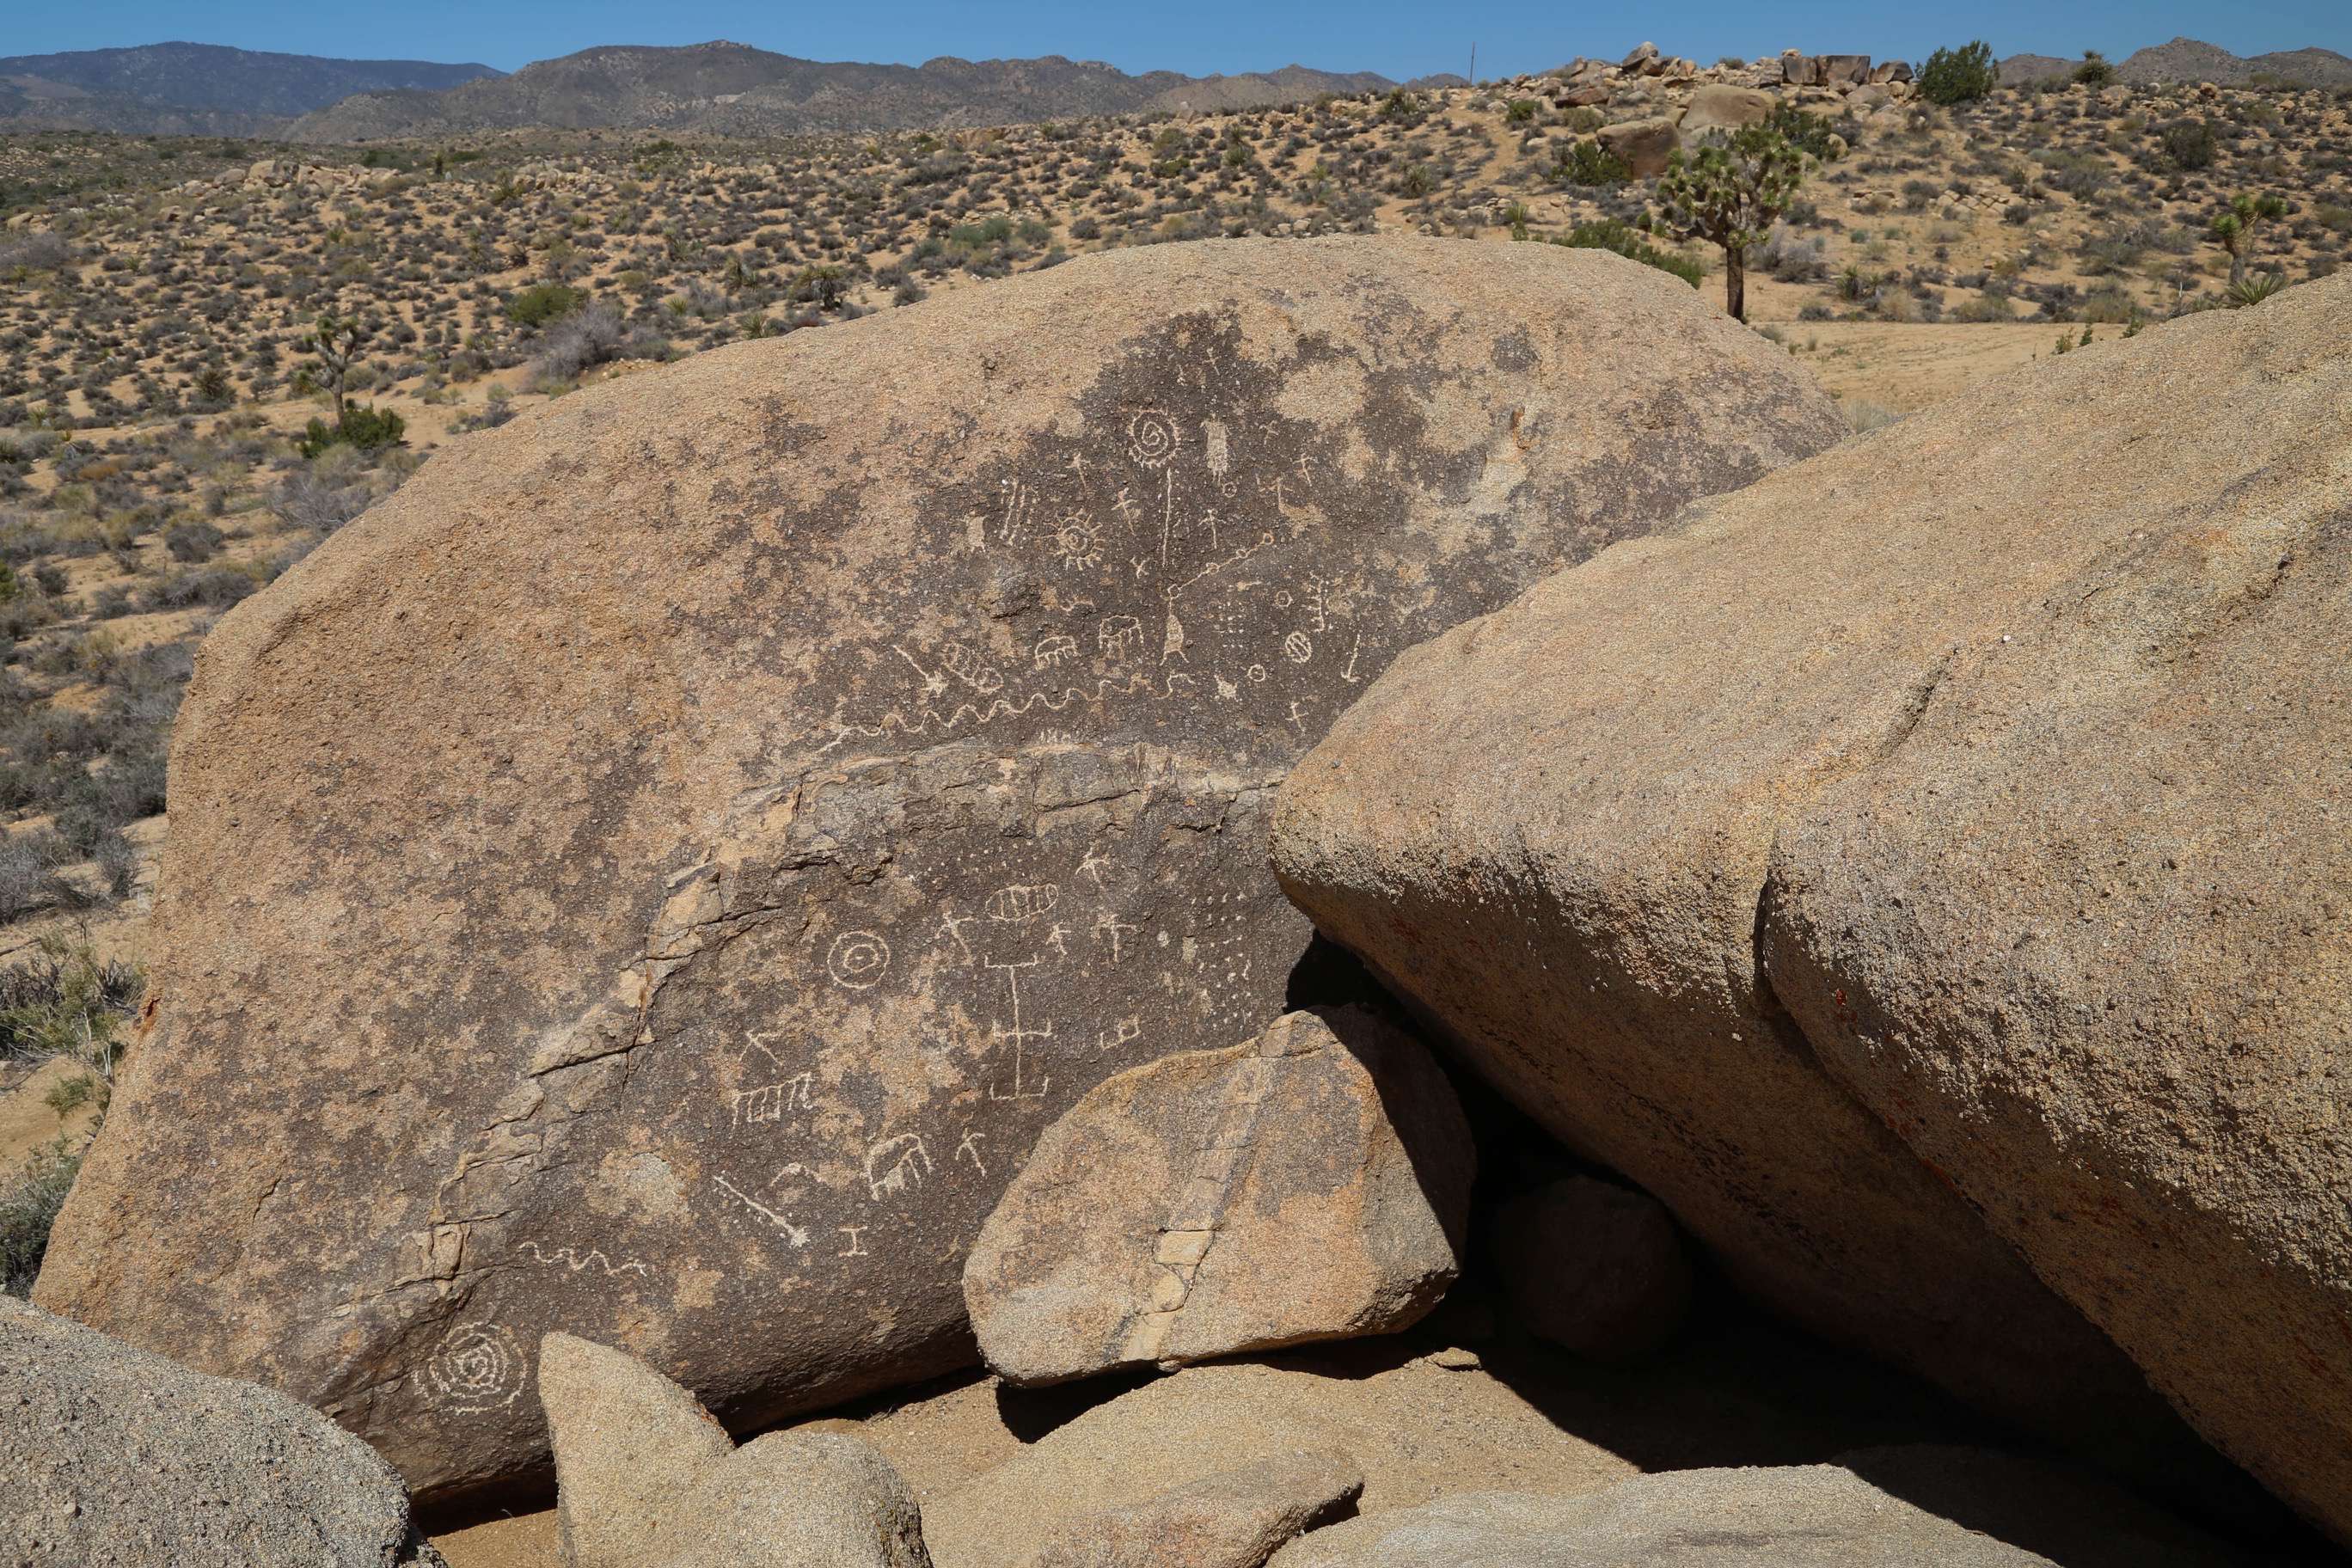 Locals who know the area well can lead you to the site of these petroglyphs.